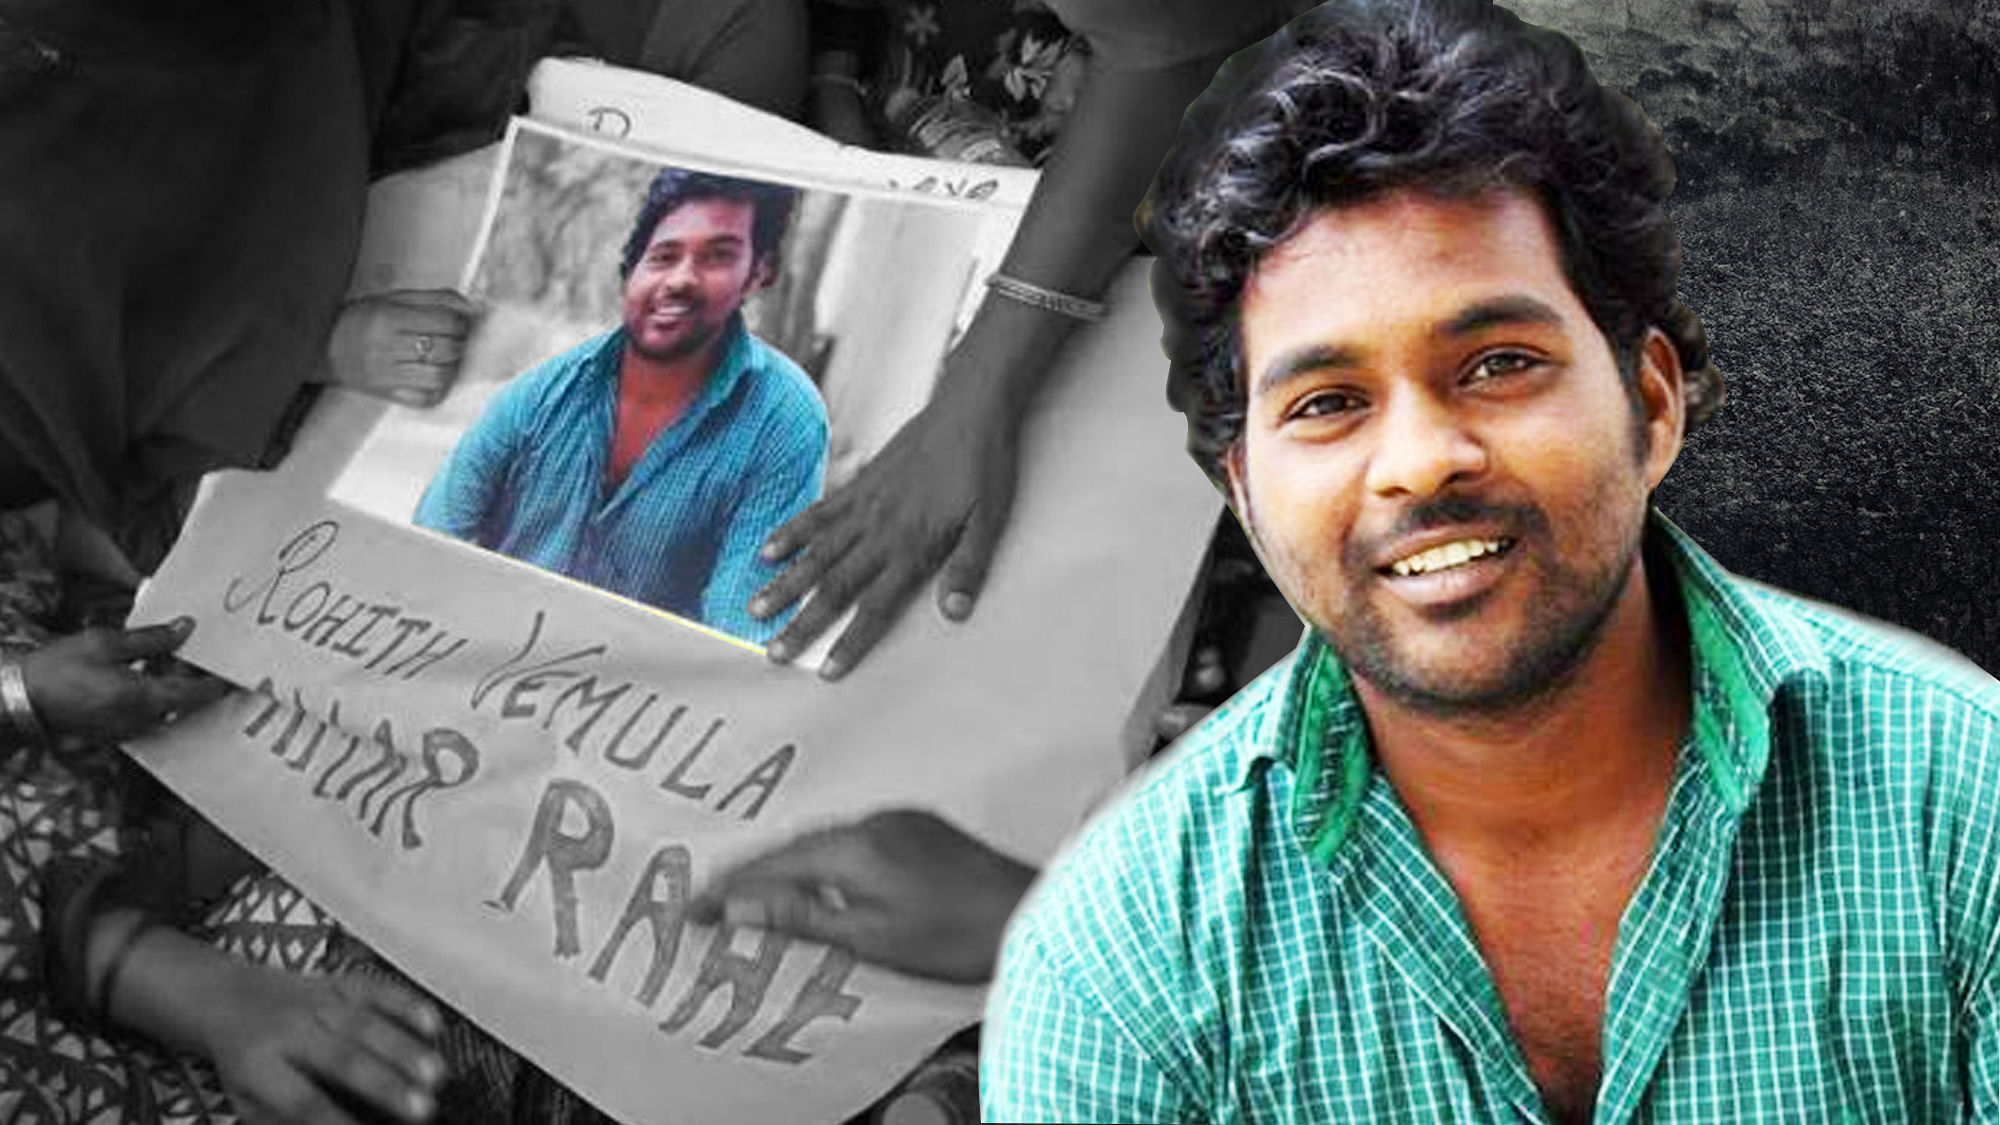  Vemula’s mother Radhika, sister Neelima and brother Raju, who visited the campus, demanded that “those responsible for his death” be brought to book. (Photo: Altered by <b>The Quint)</b>